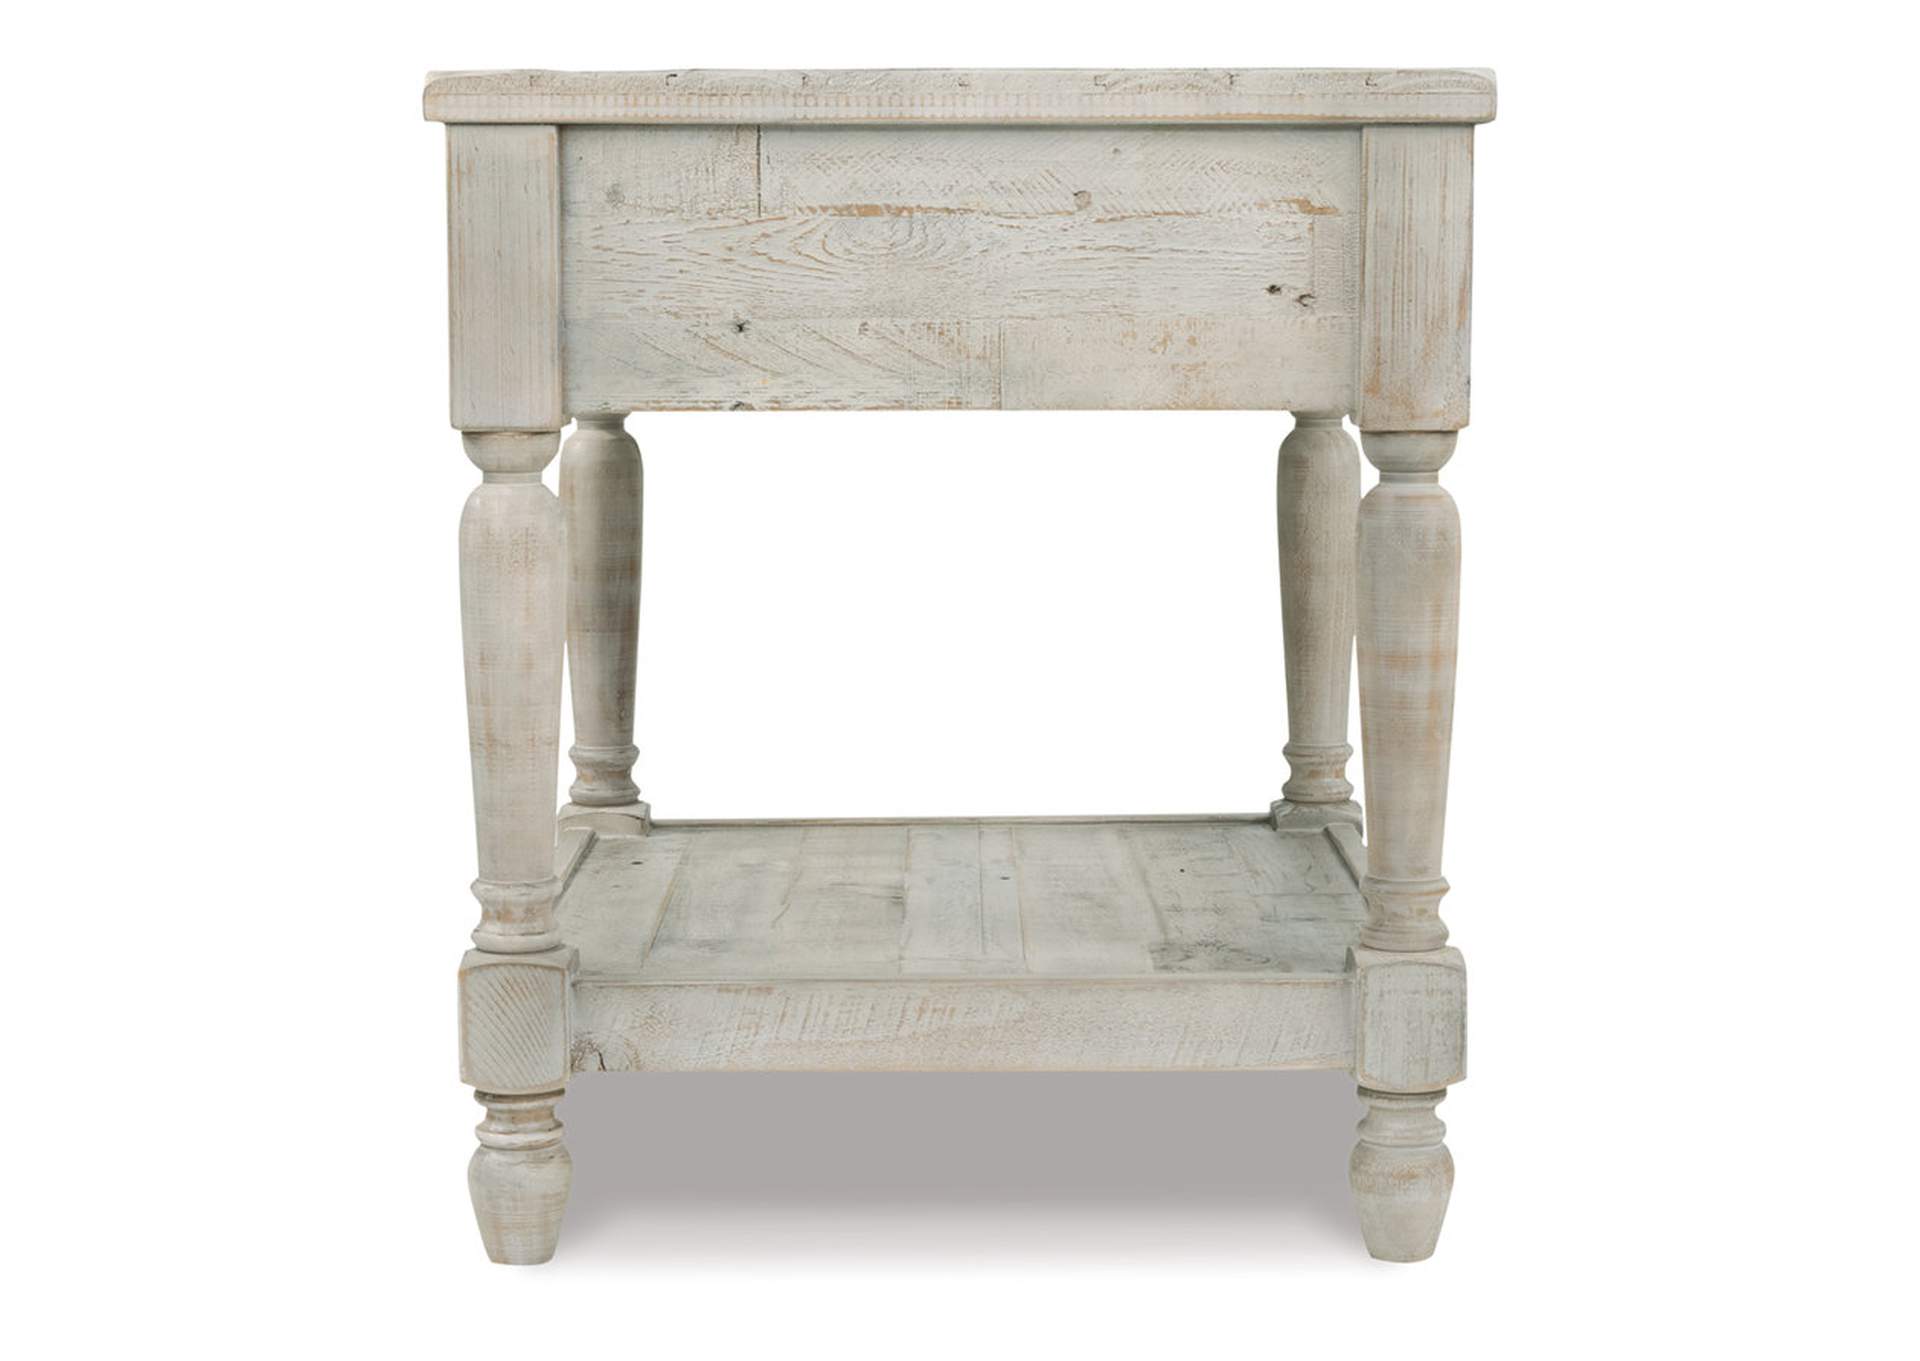 Shawnalore End Table,Direct To Consumer Express